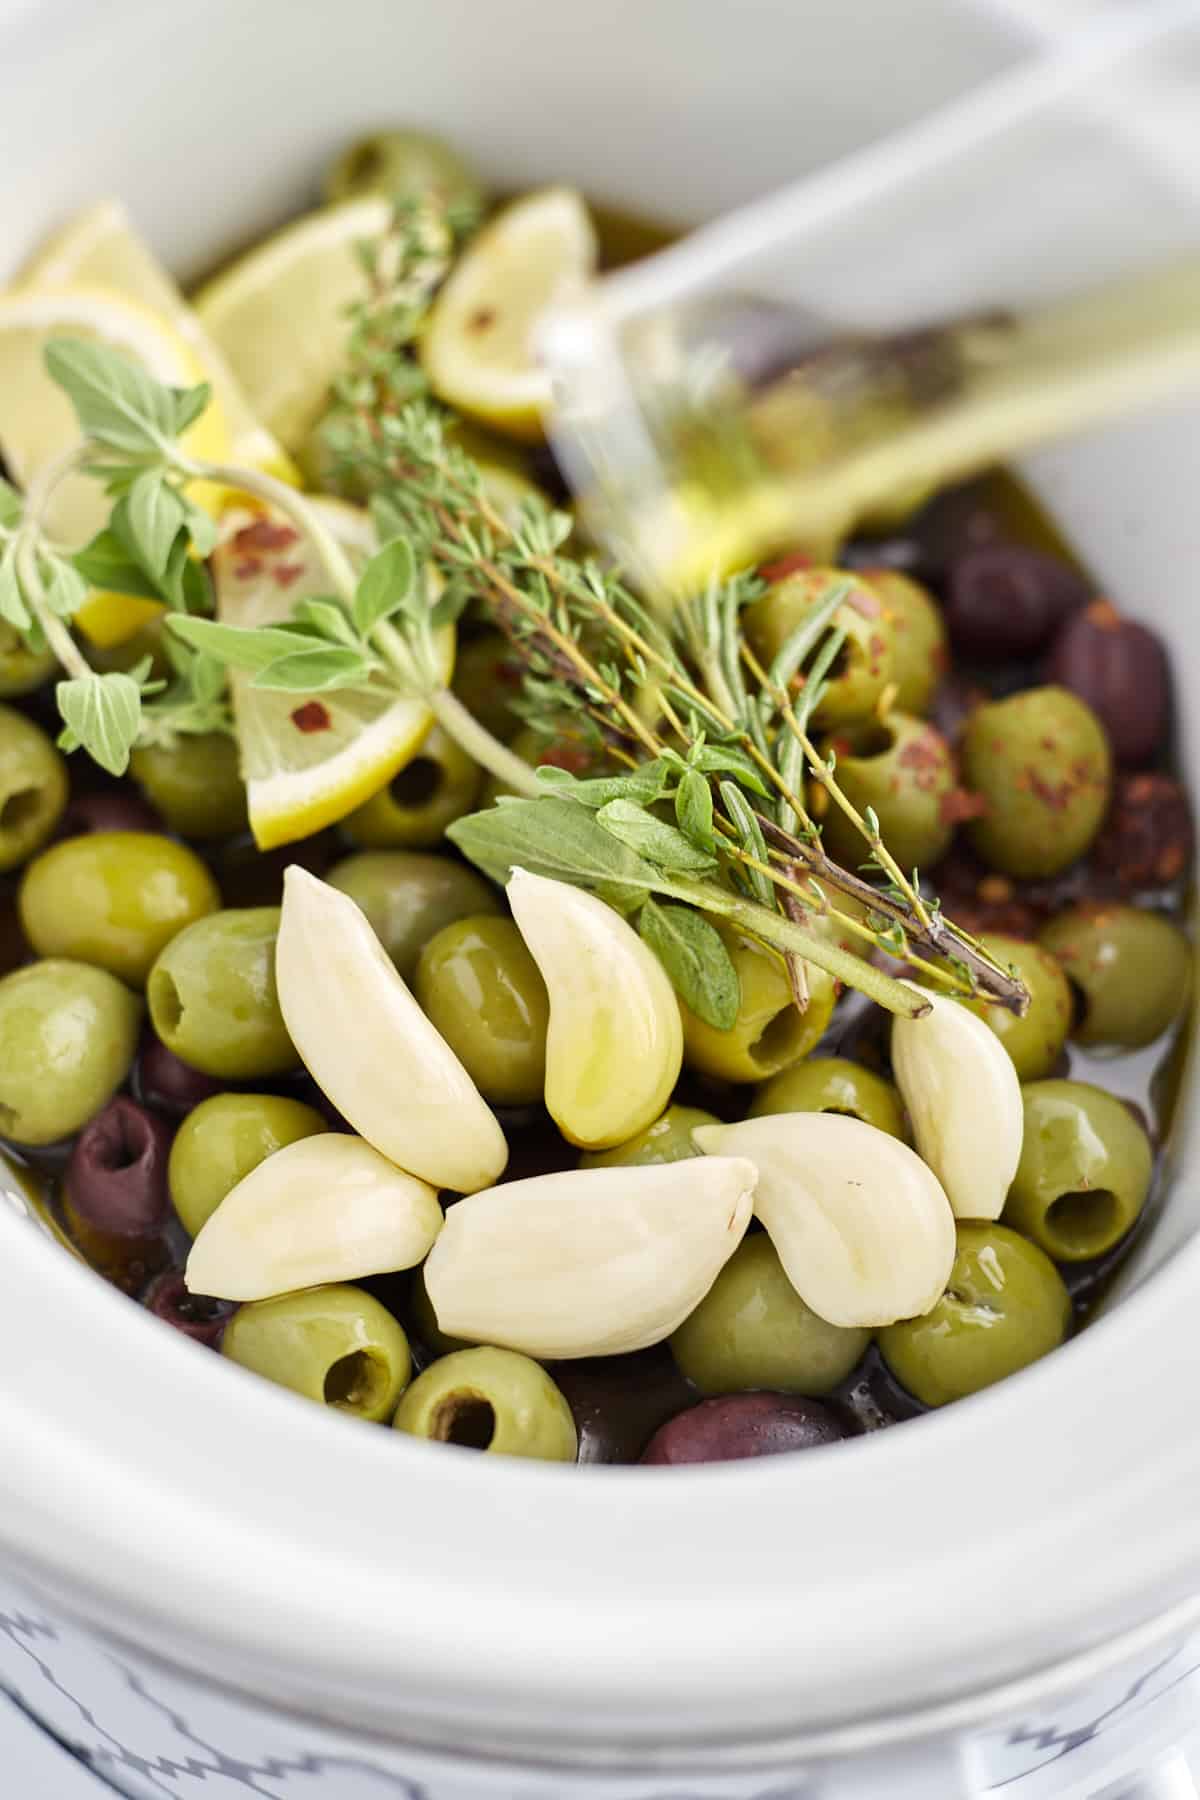 green and red olives, lemon wedges, garlic, and herbs in a slow cooker to make roasted olives